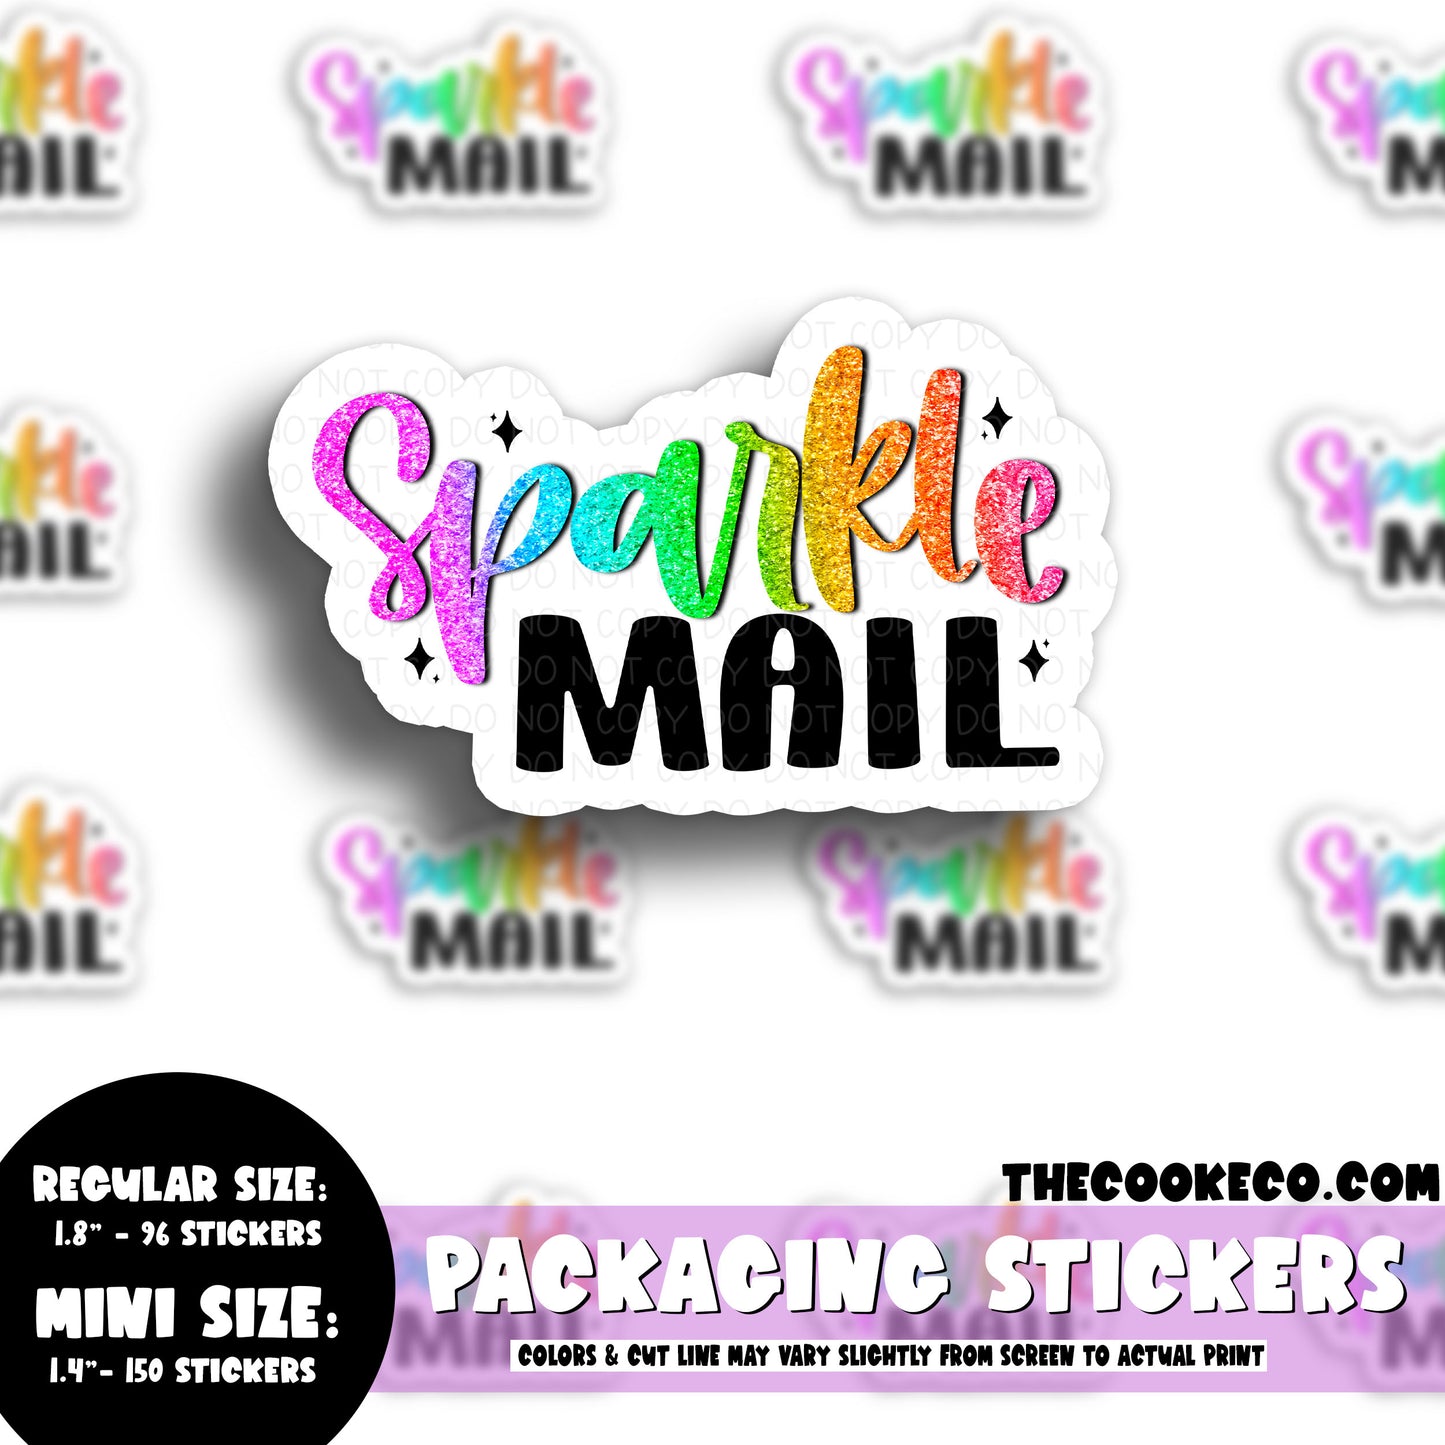 Packaging Stickers | #C0711 - SPARKLE MAIL